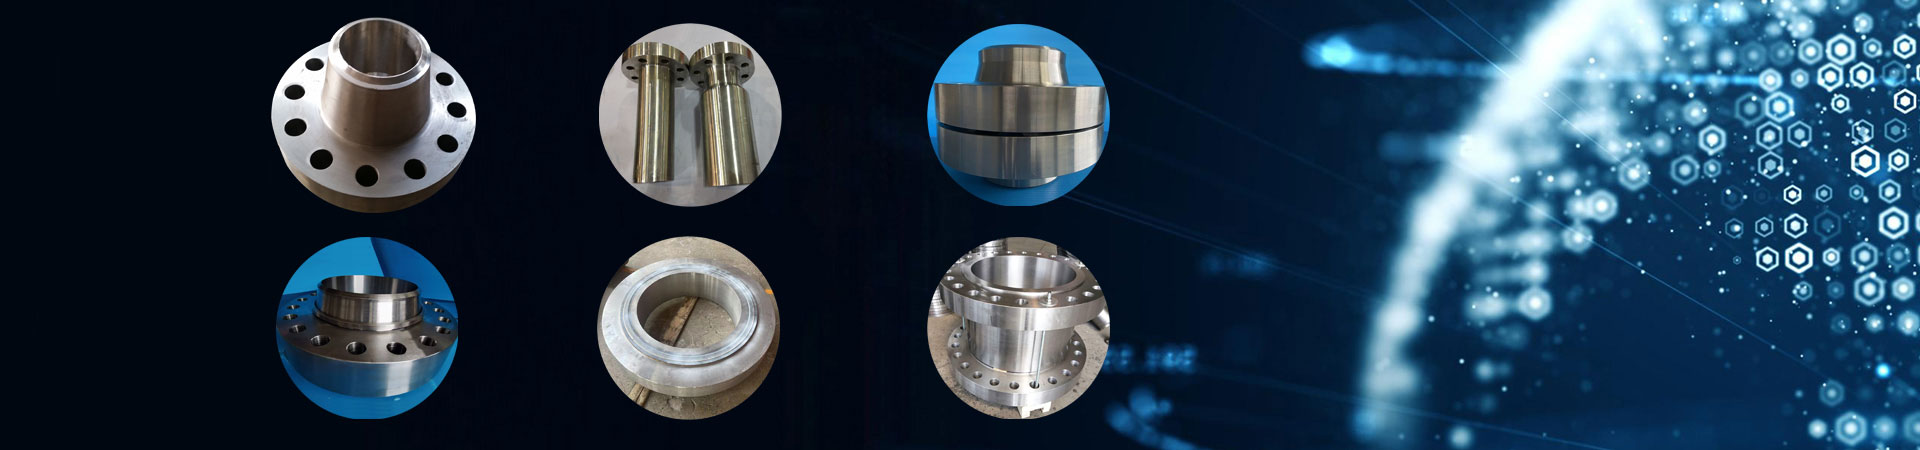 THREADED FLANGES CL150 300, CHINA MANUFACTURER FORGED FLANGES, LOW PRICE CARBON STEEL FLANGES